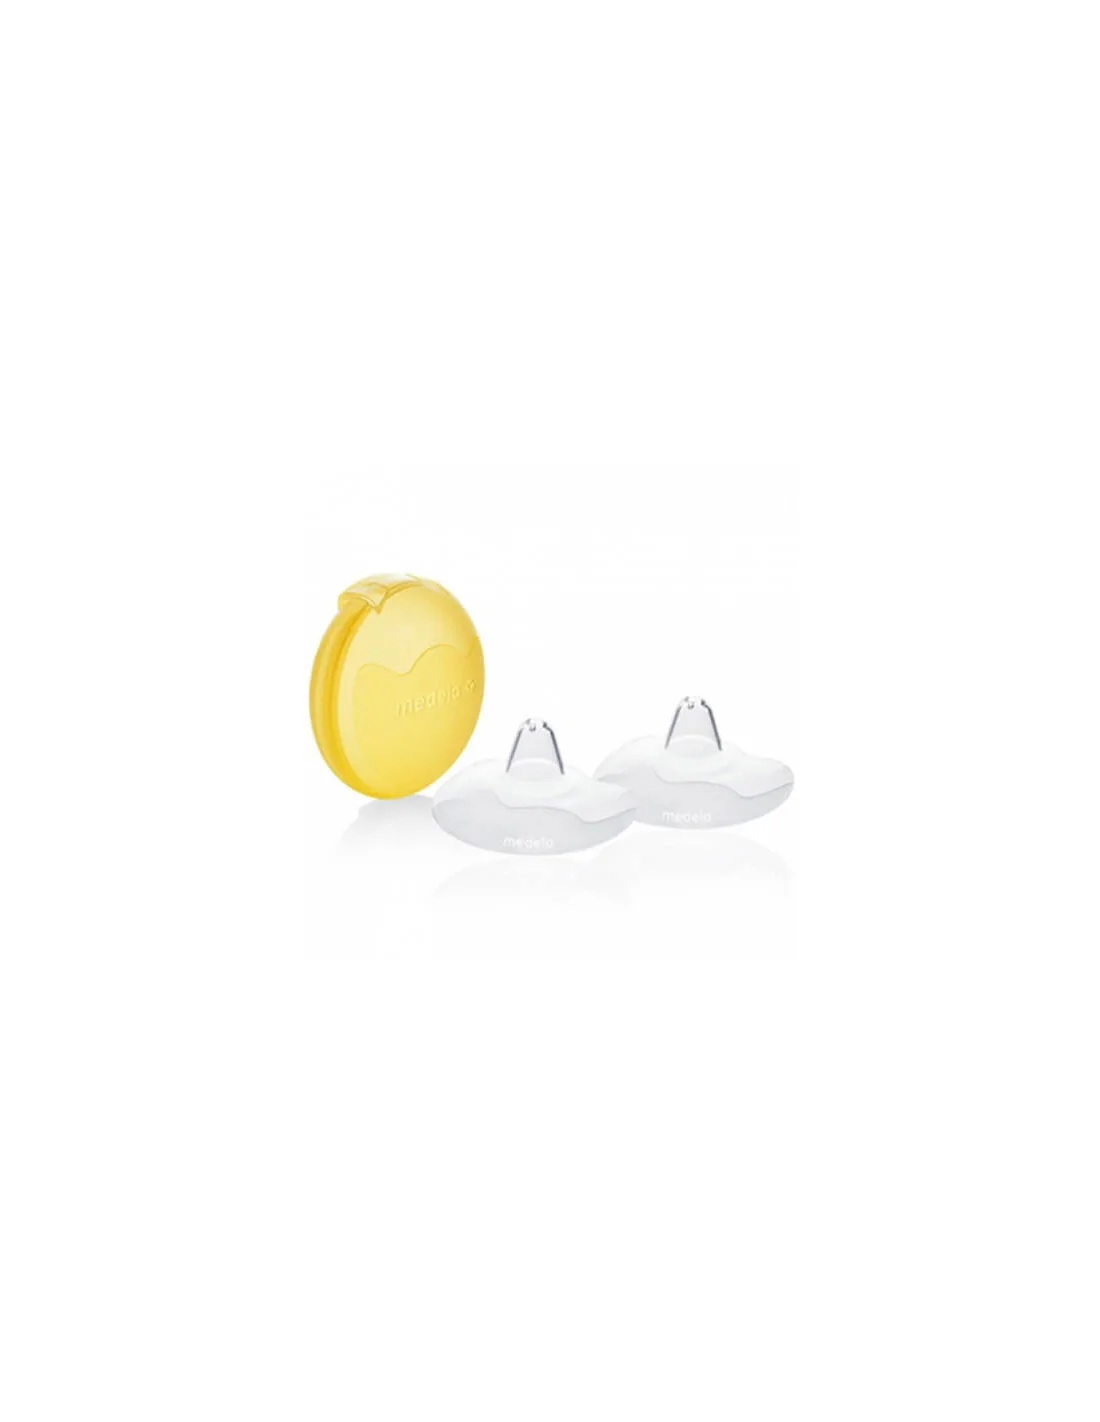 Medela Bouts de sein Contact taille M 20 mm